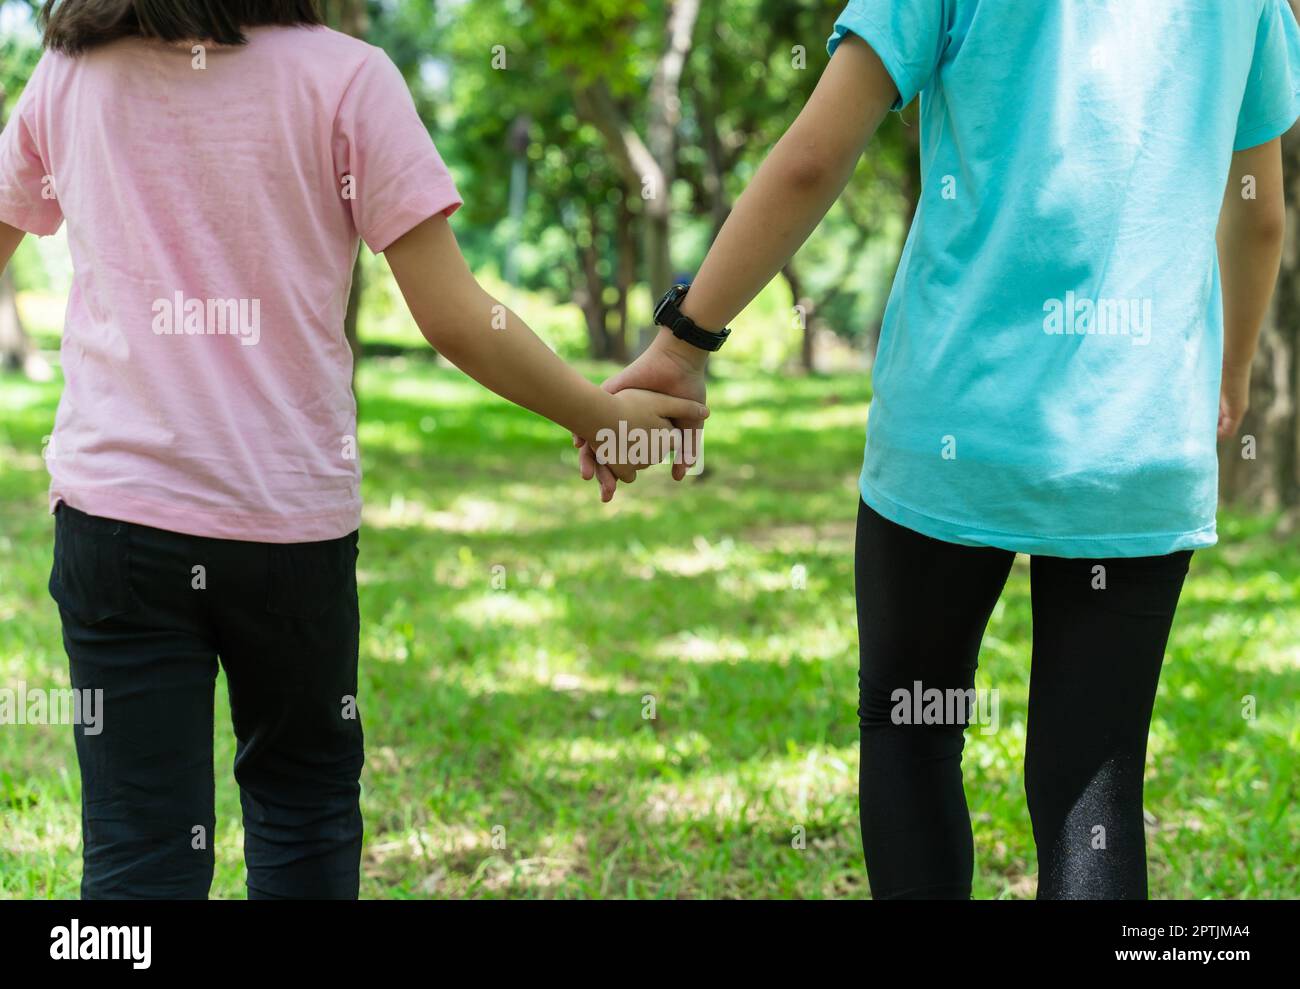 Two sister holding hands in the park in warm spring day. Happy friendship family concept. Stock Photo